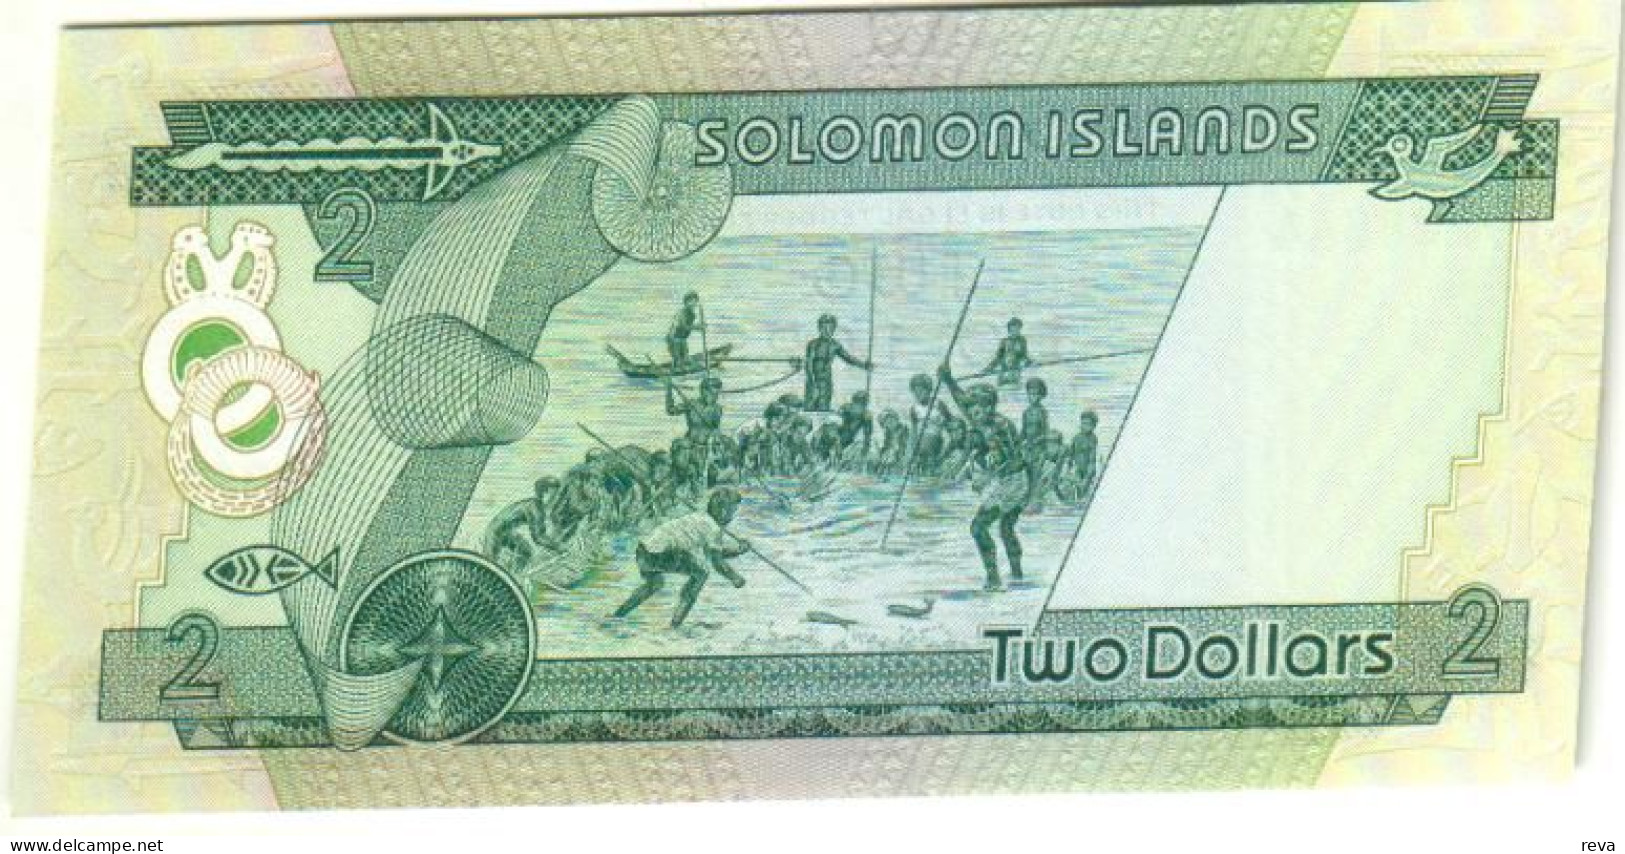 SOLOMON ISLANDS $2  GREEN QEII FRONT PEOPLE BACK ND(1977) P5a F+ 1 YEAR ONLY READ DESCRIPTION !! - Isola Salomon